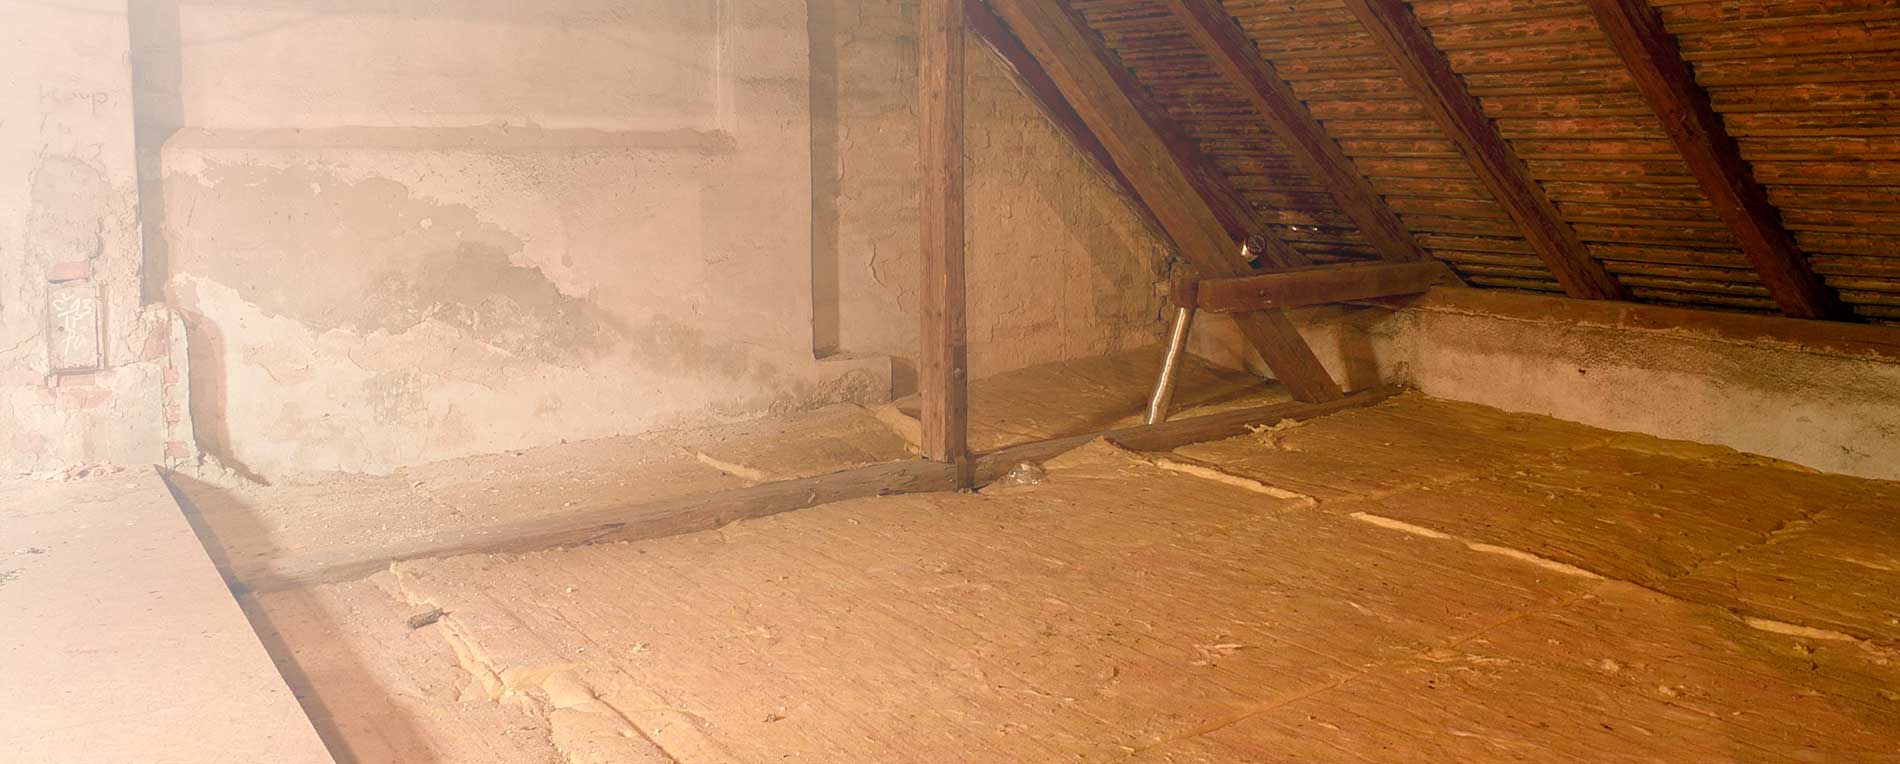 3 Reasons Why Rodent Proofing Your Home Is Important